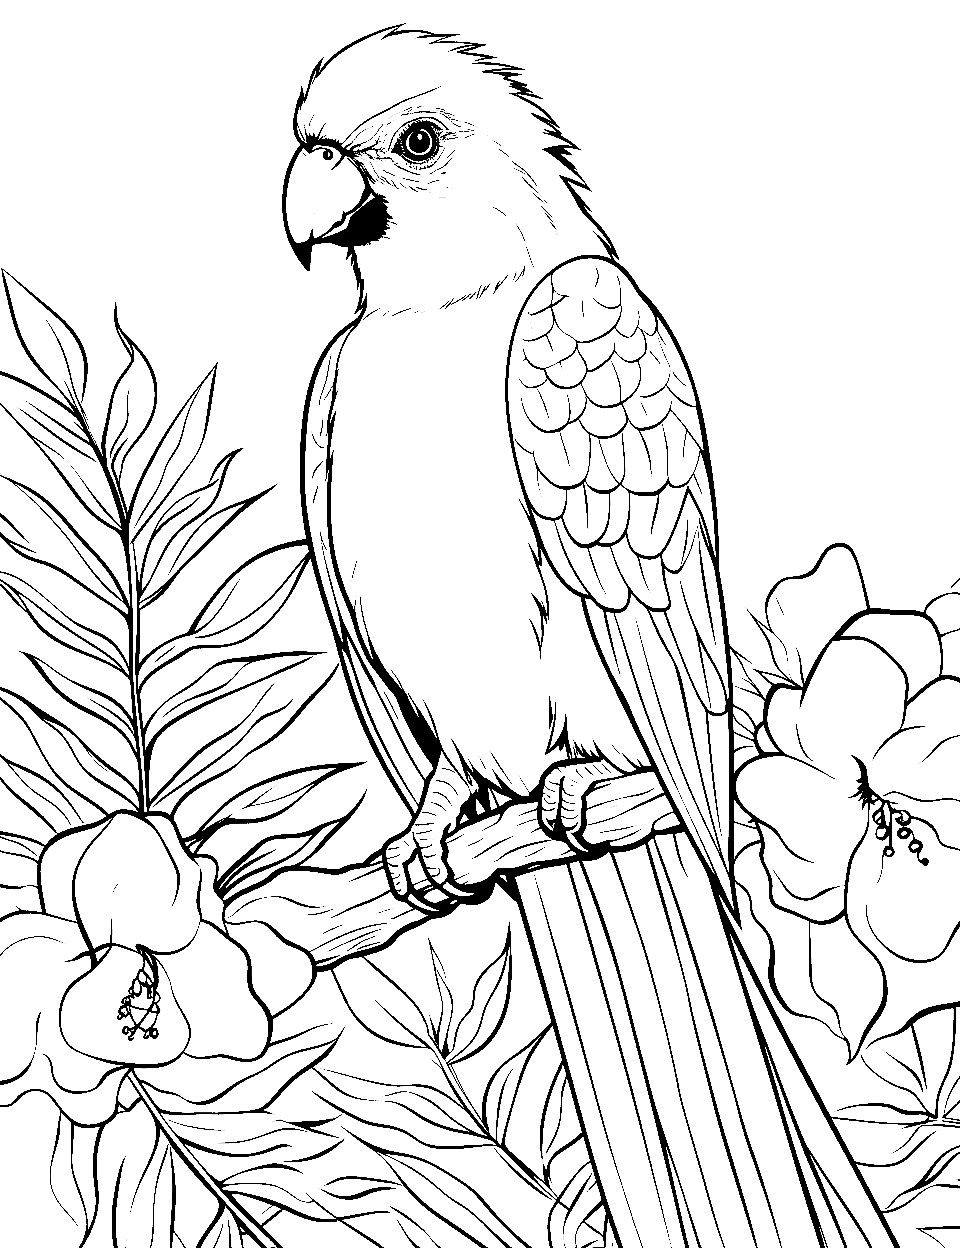 Tropical Bird's Paradise Coloring Page - A tropical bird surrounded by exotic flowers.